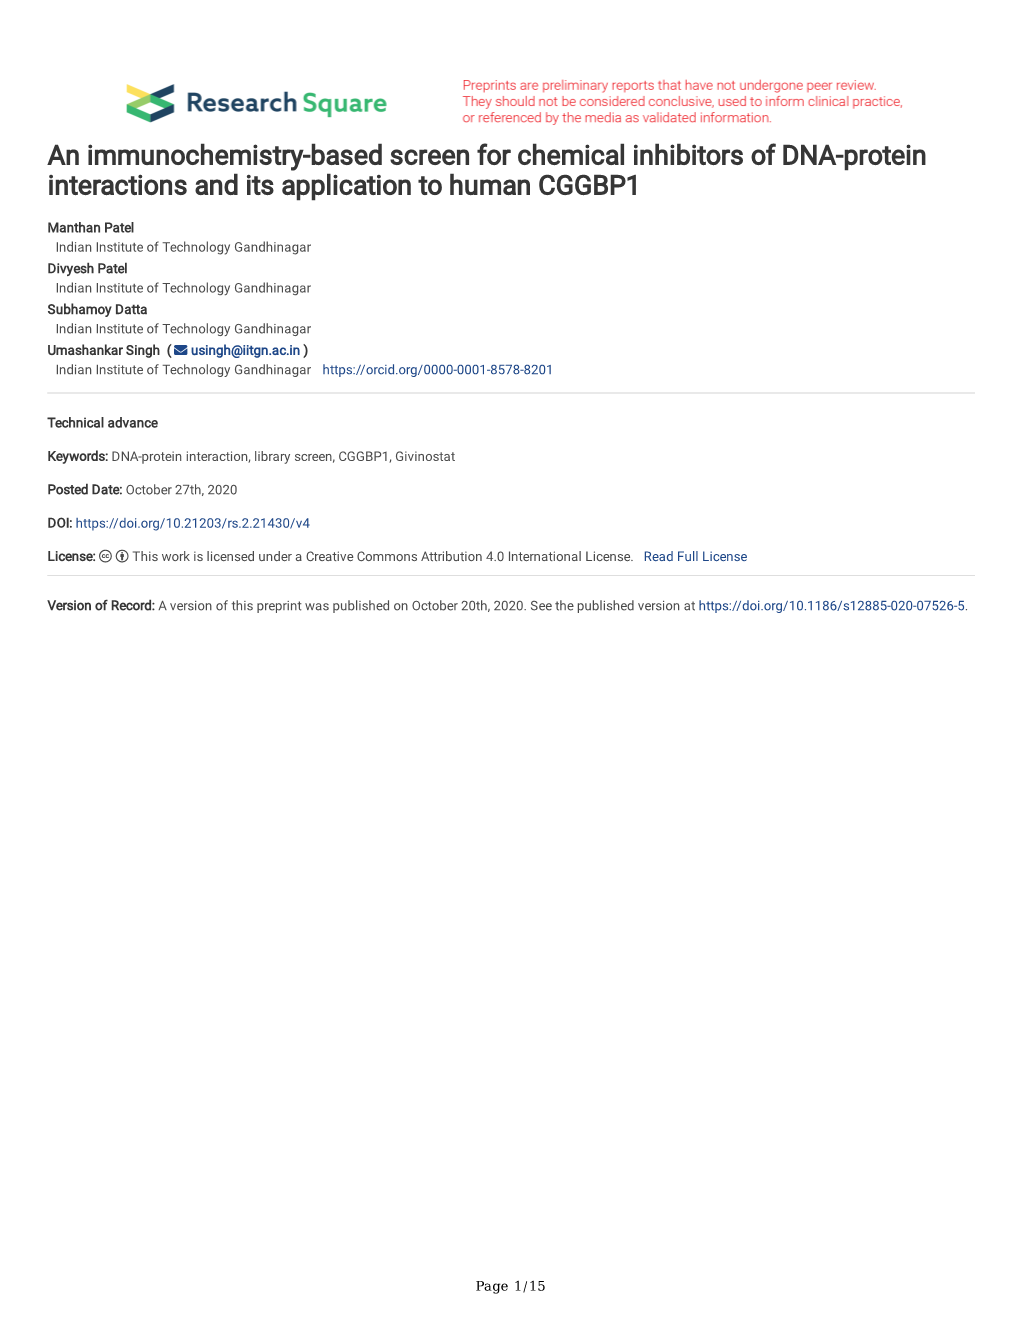 An Immunochemistry-Based Screen for Chemical Inhibitors of DNA-Protein Interactions and Its Application to Human CGGBP1